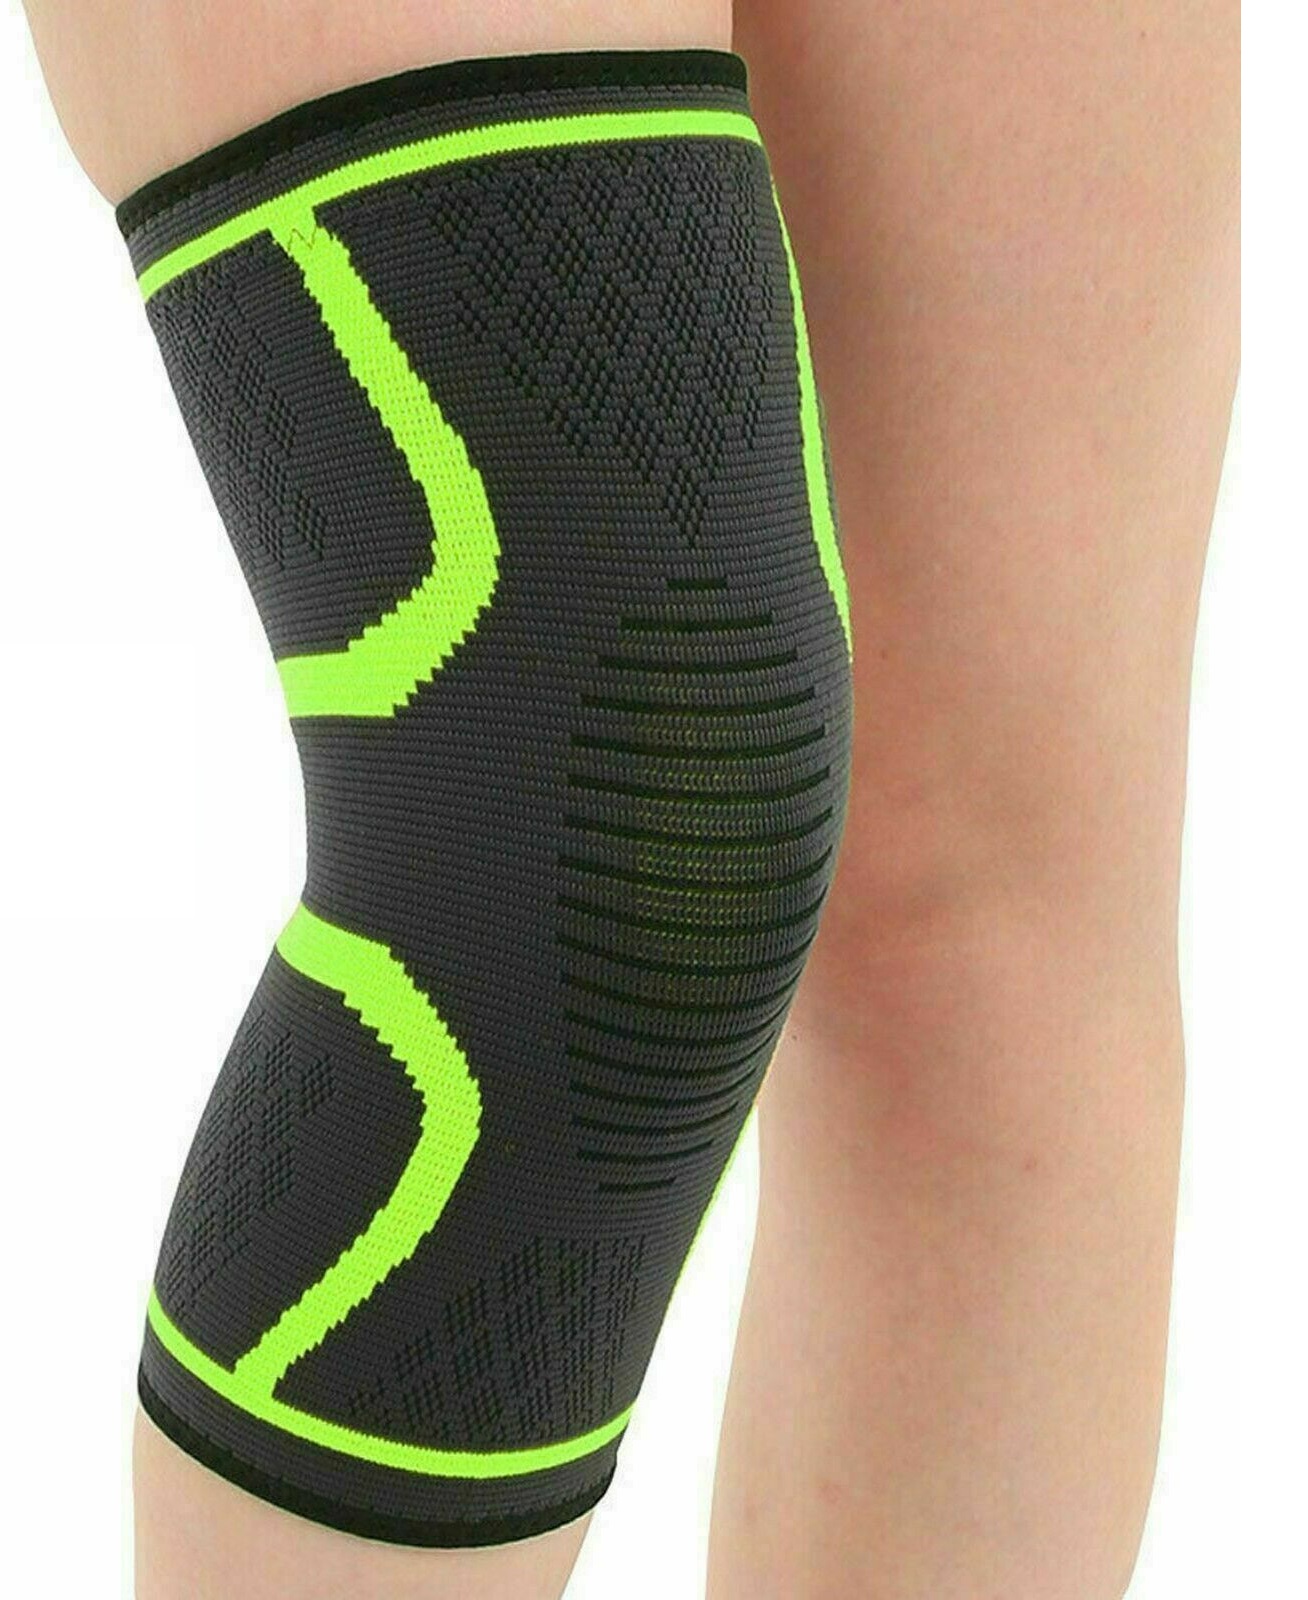 Green Large Knee Support Brace Compression Sleeve Arthritis For Running Gym Sports Protector